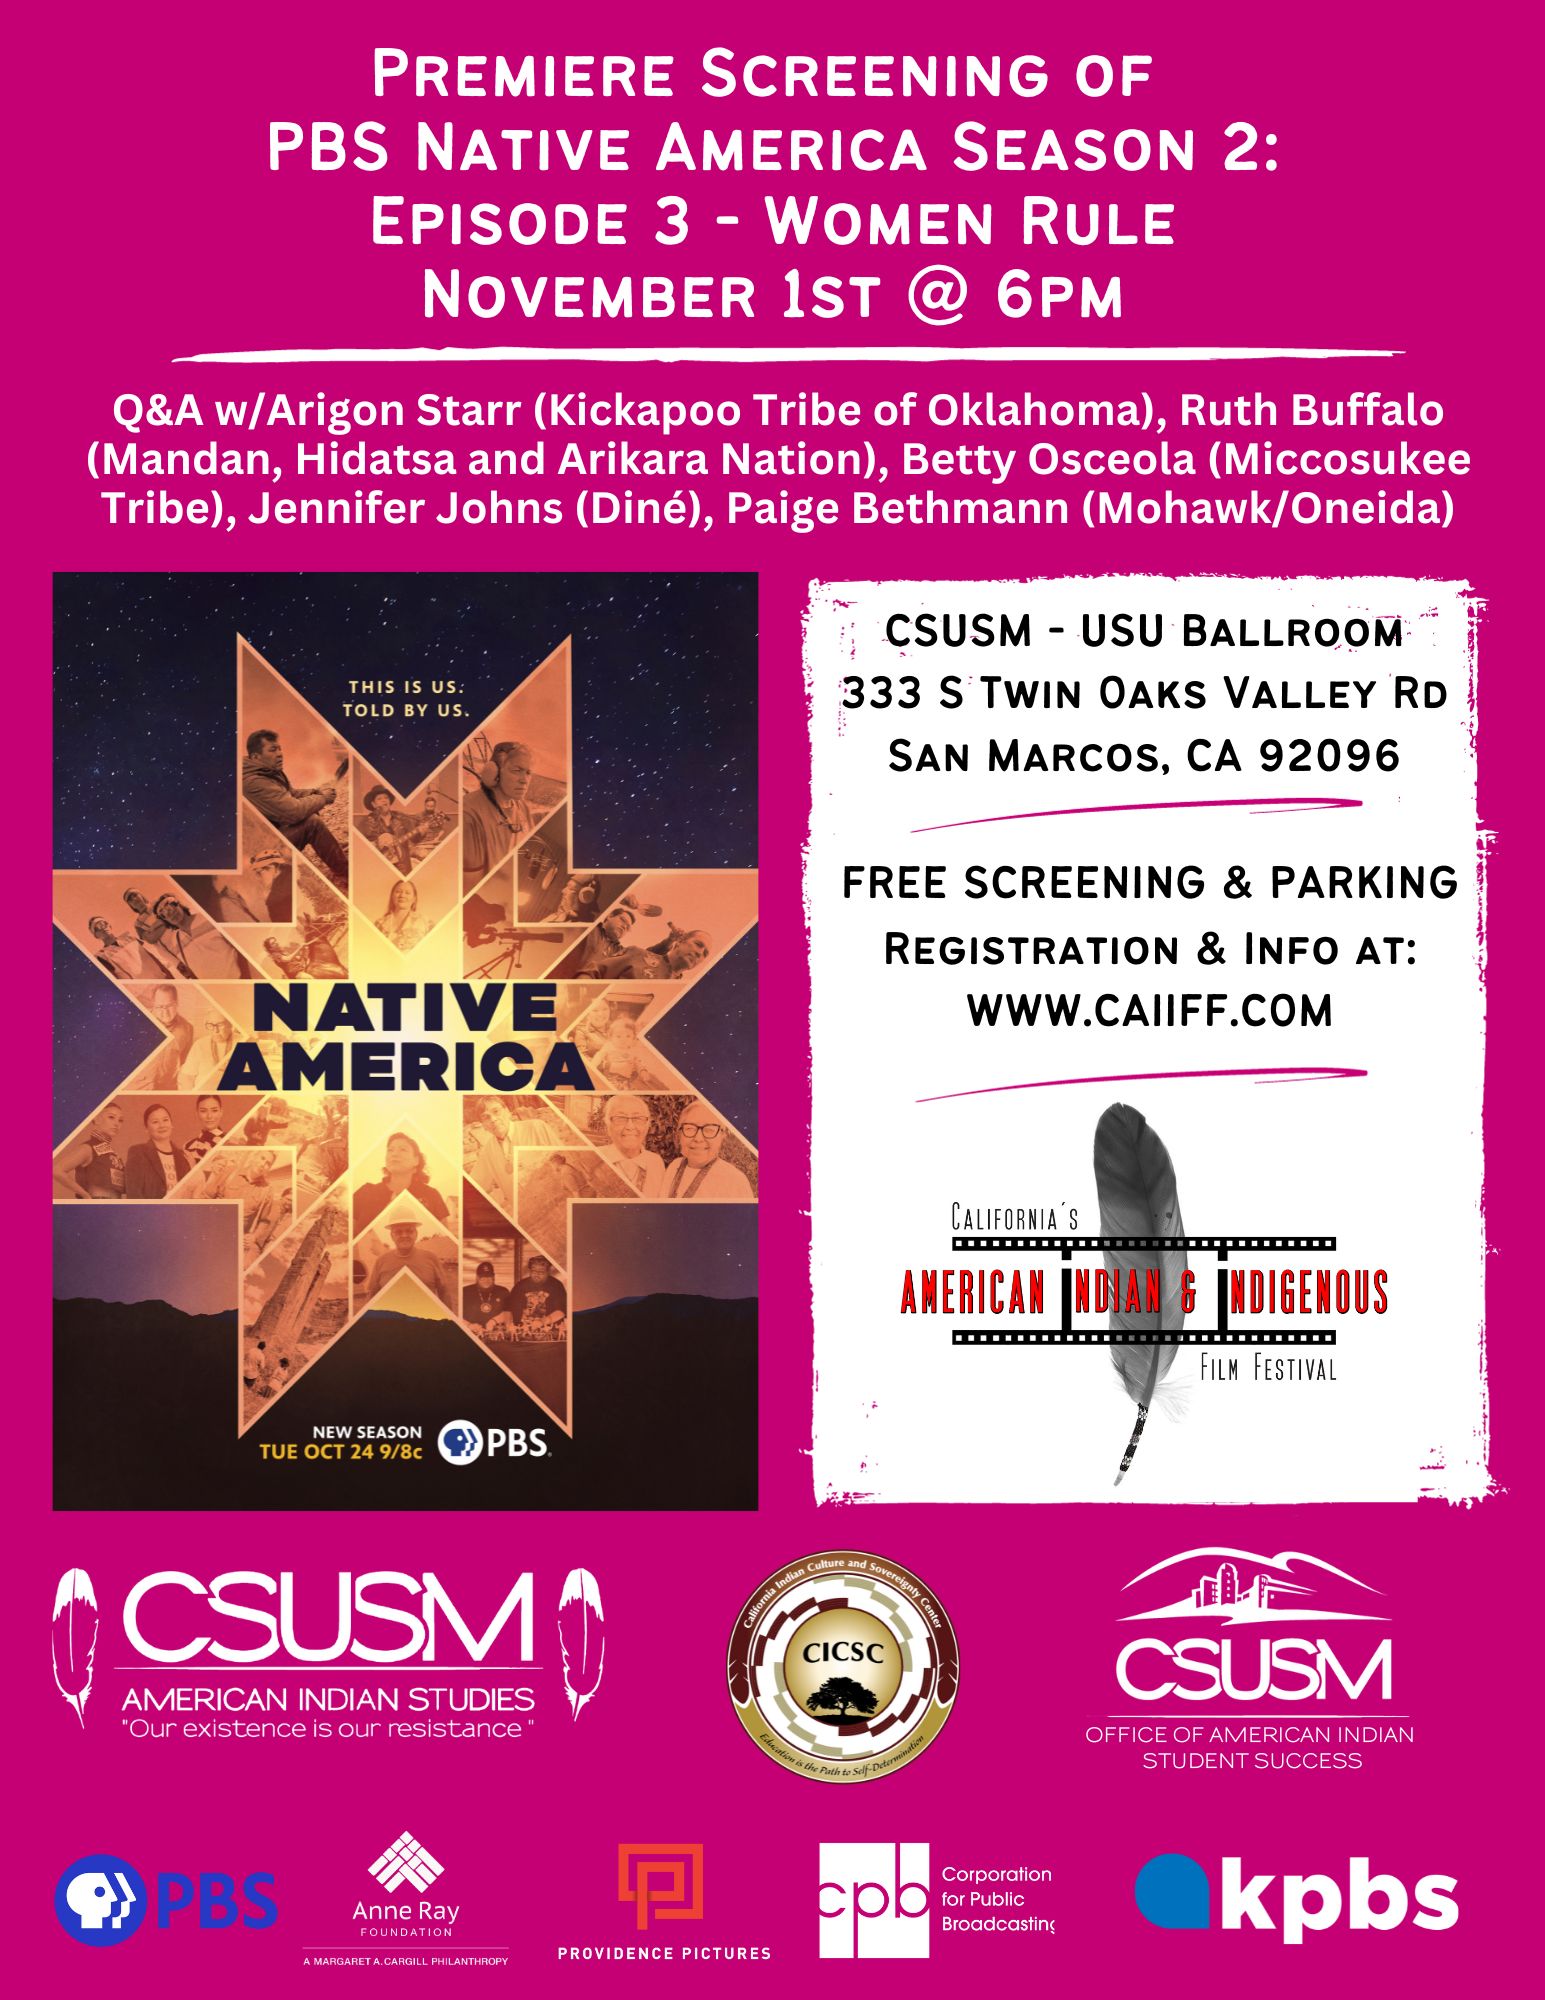 Native America screening flyer with magenta background, an image of the official PBS Native America poster and information about the event